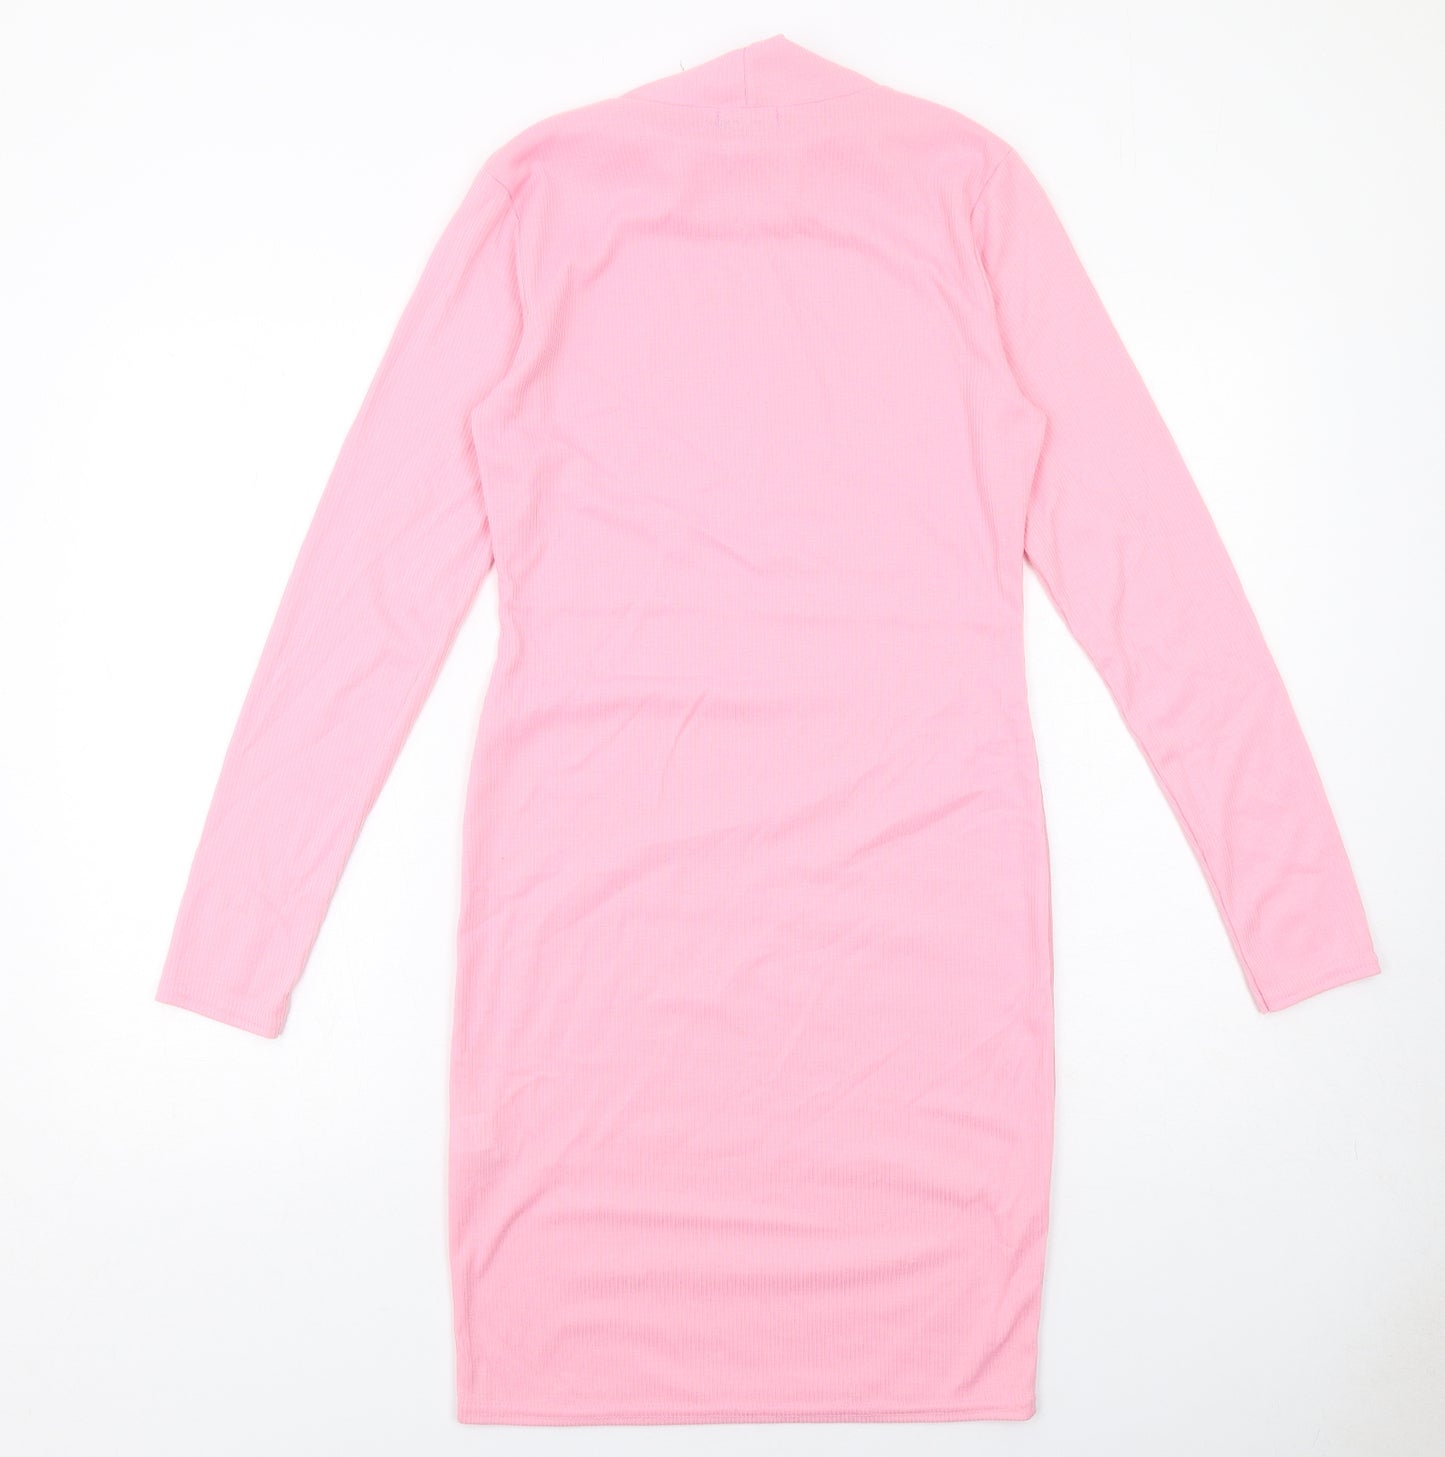 Boohoo Womens Pink Polyester Jumper Dress Size 12 High Neck Pullover